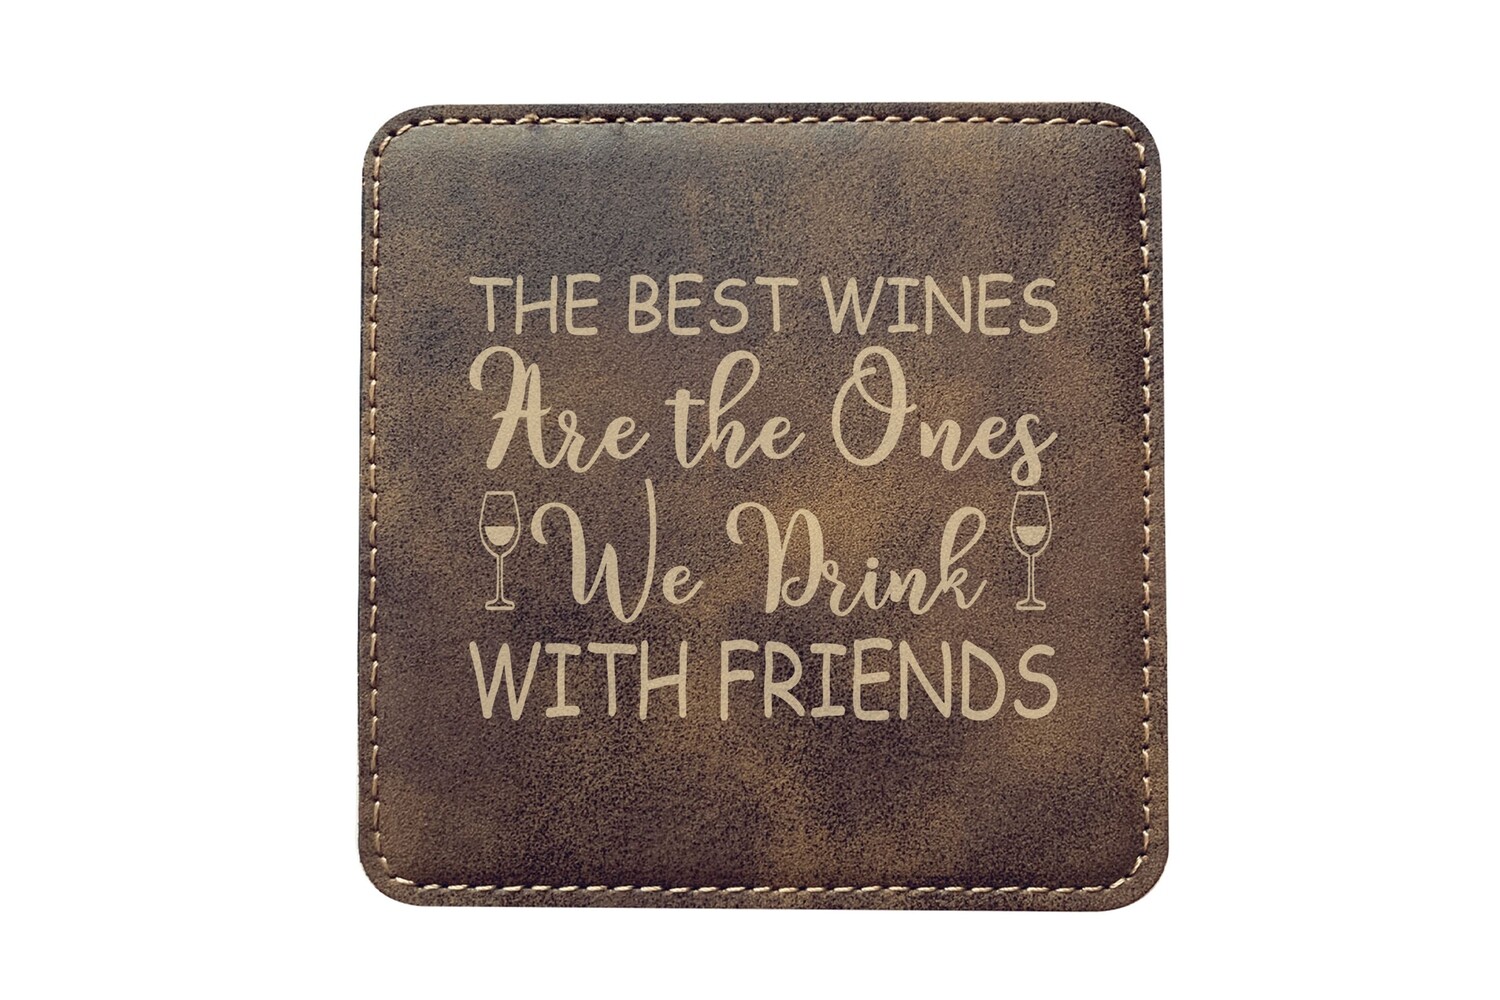 The Best Wines are the Ones We Drink with Friends Leatherette Coaster Set